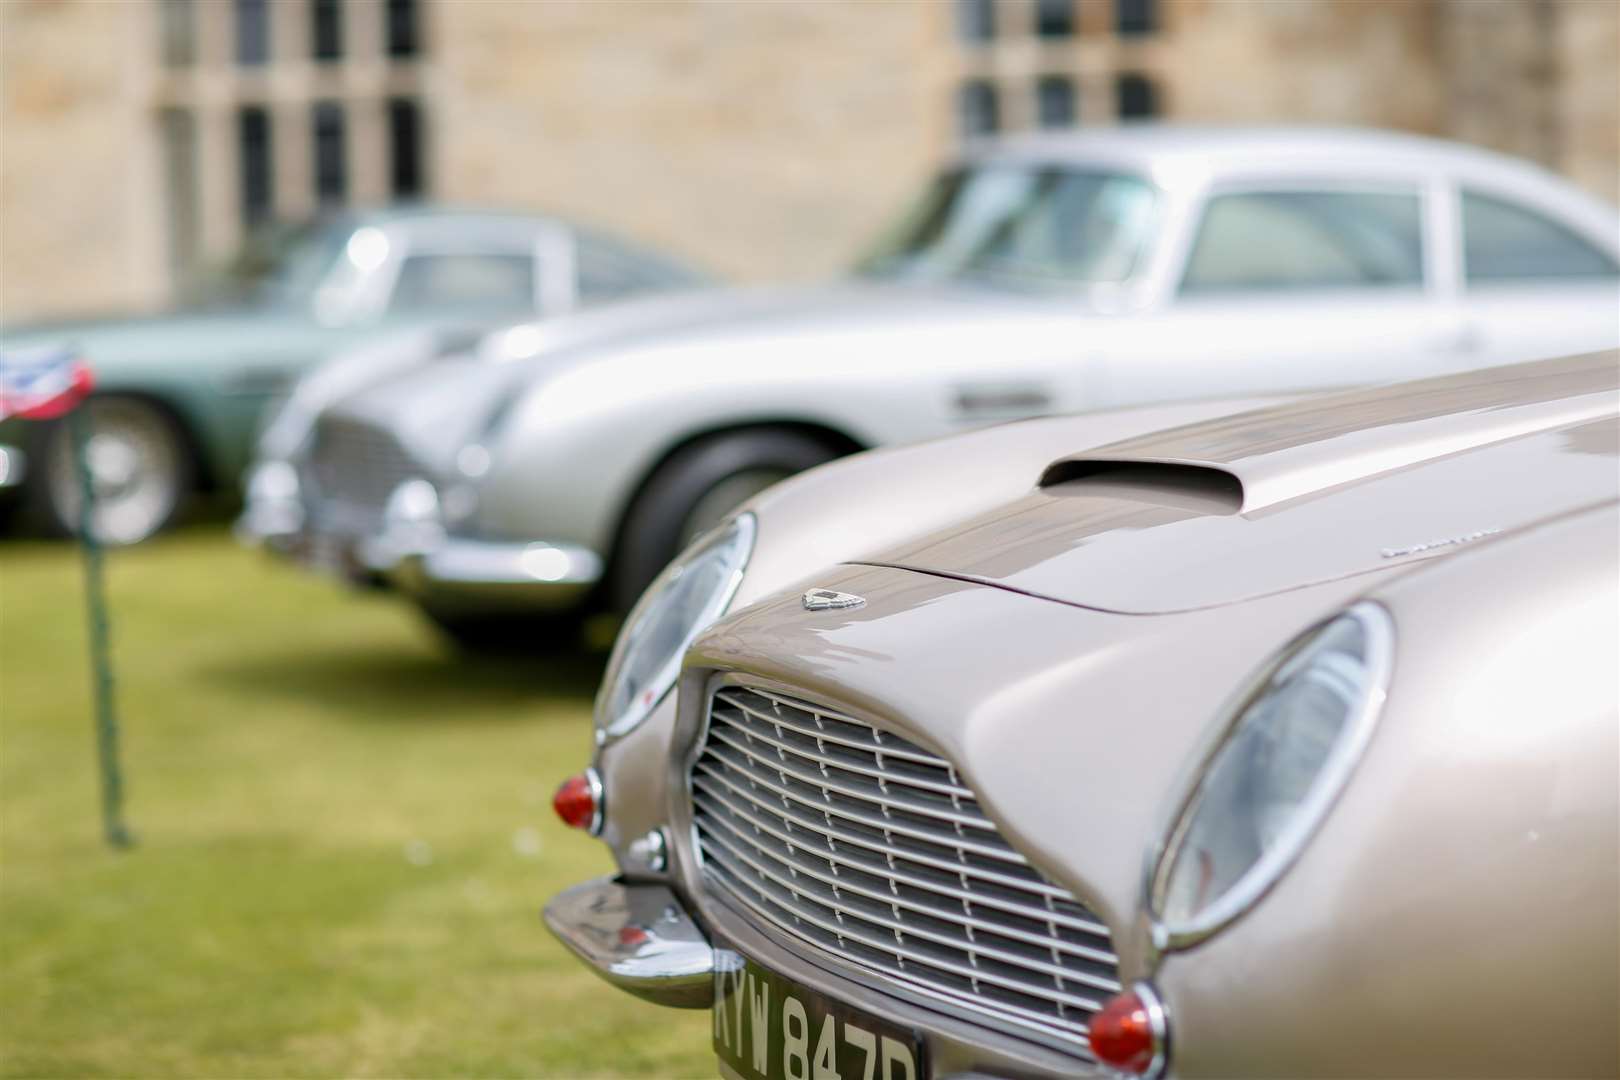 Classic Aston Martins on the island lawn at Leeds castle. Picture by: www.matthewwalkerphotography.com